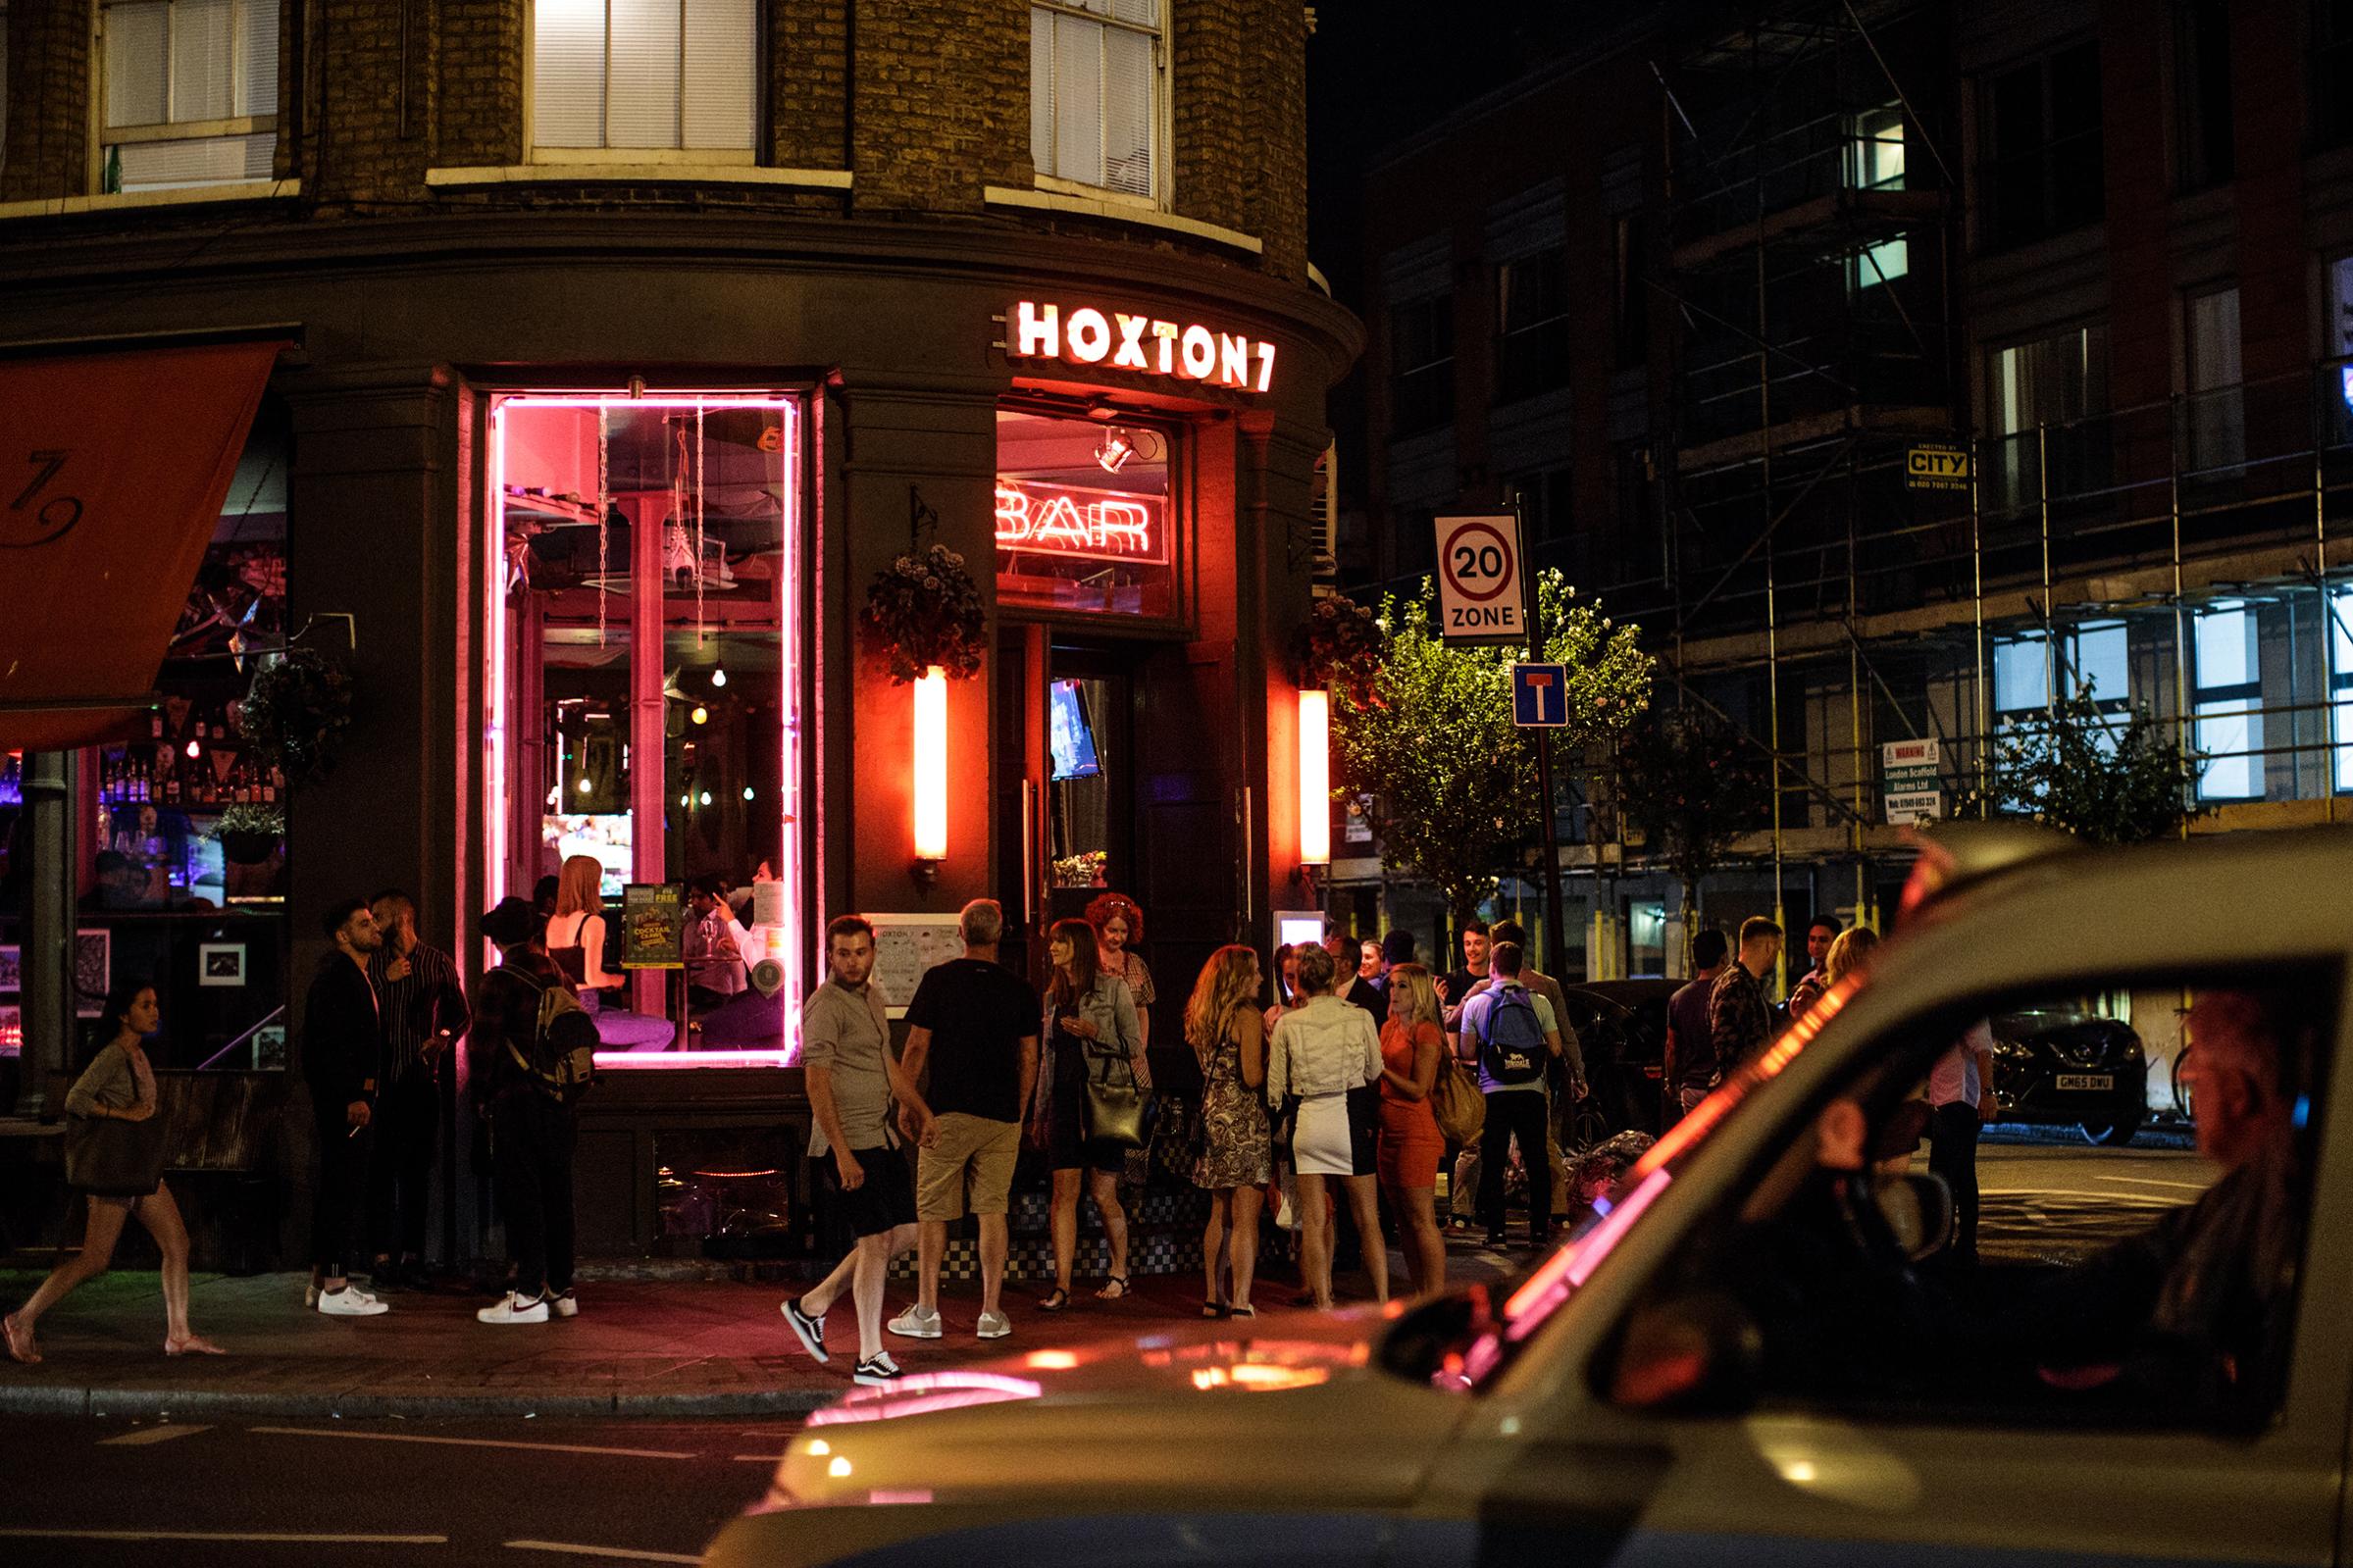 People gather outside a bar in Shoreditch, on July 28, 2018 in London, England.